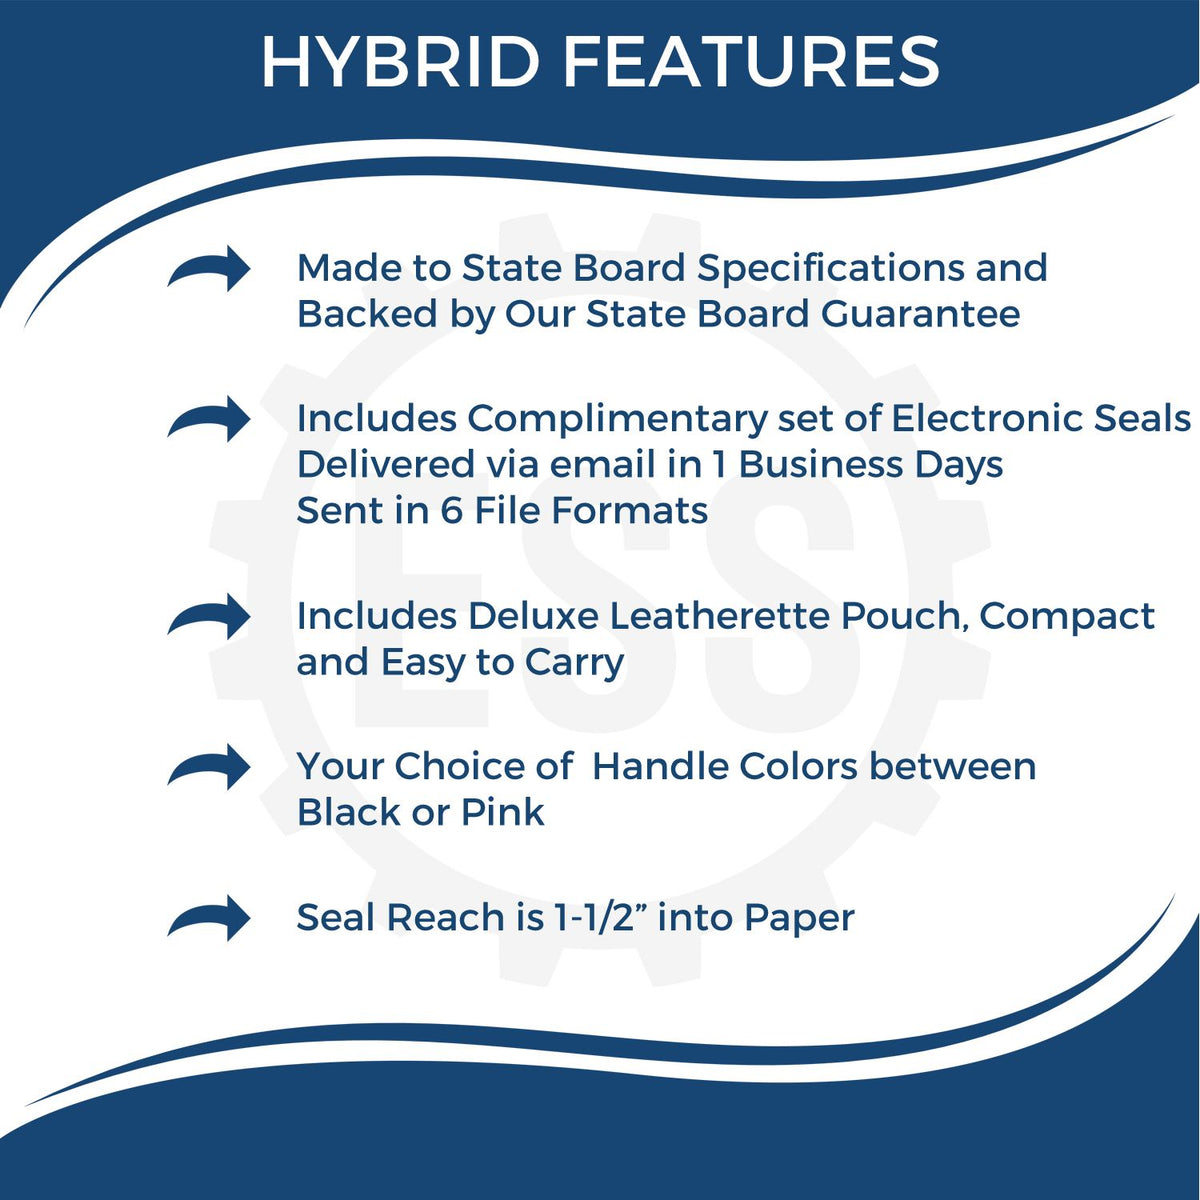 A picture of an infographic highlighting the selling points for the Hybrid Florida Architect Seal